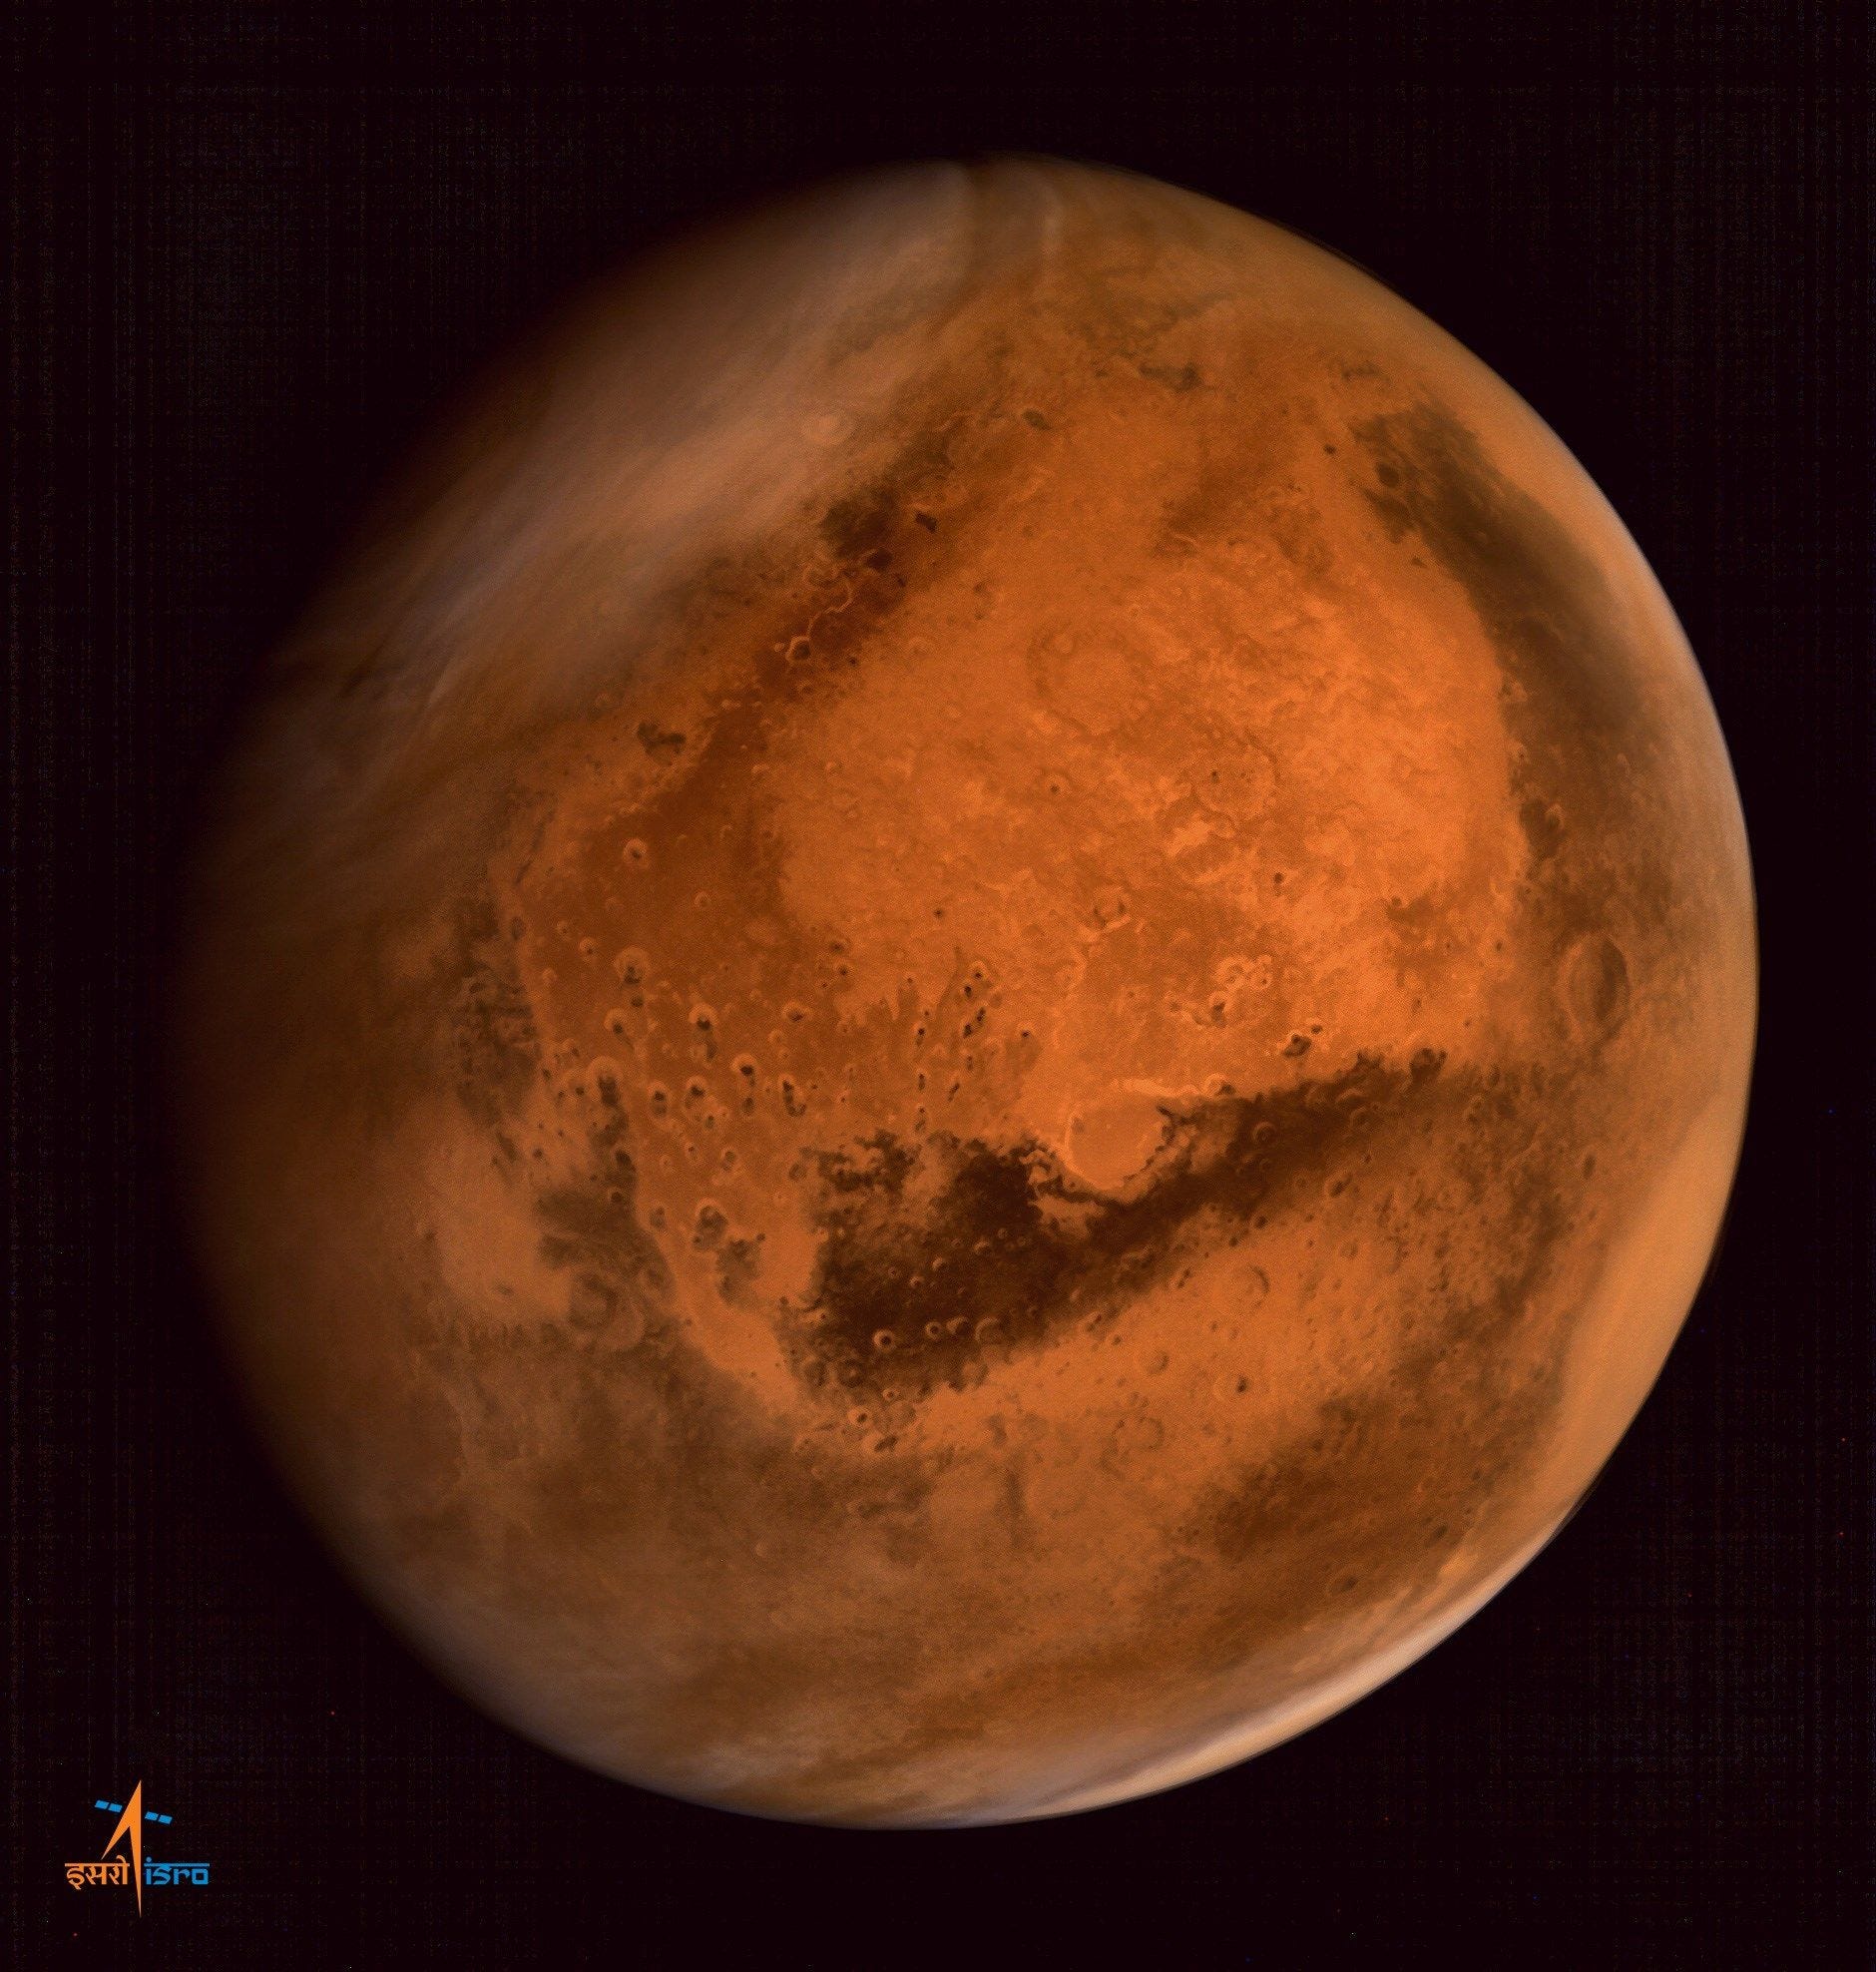 UAE aims to put human settlement on Mars by 2117